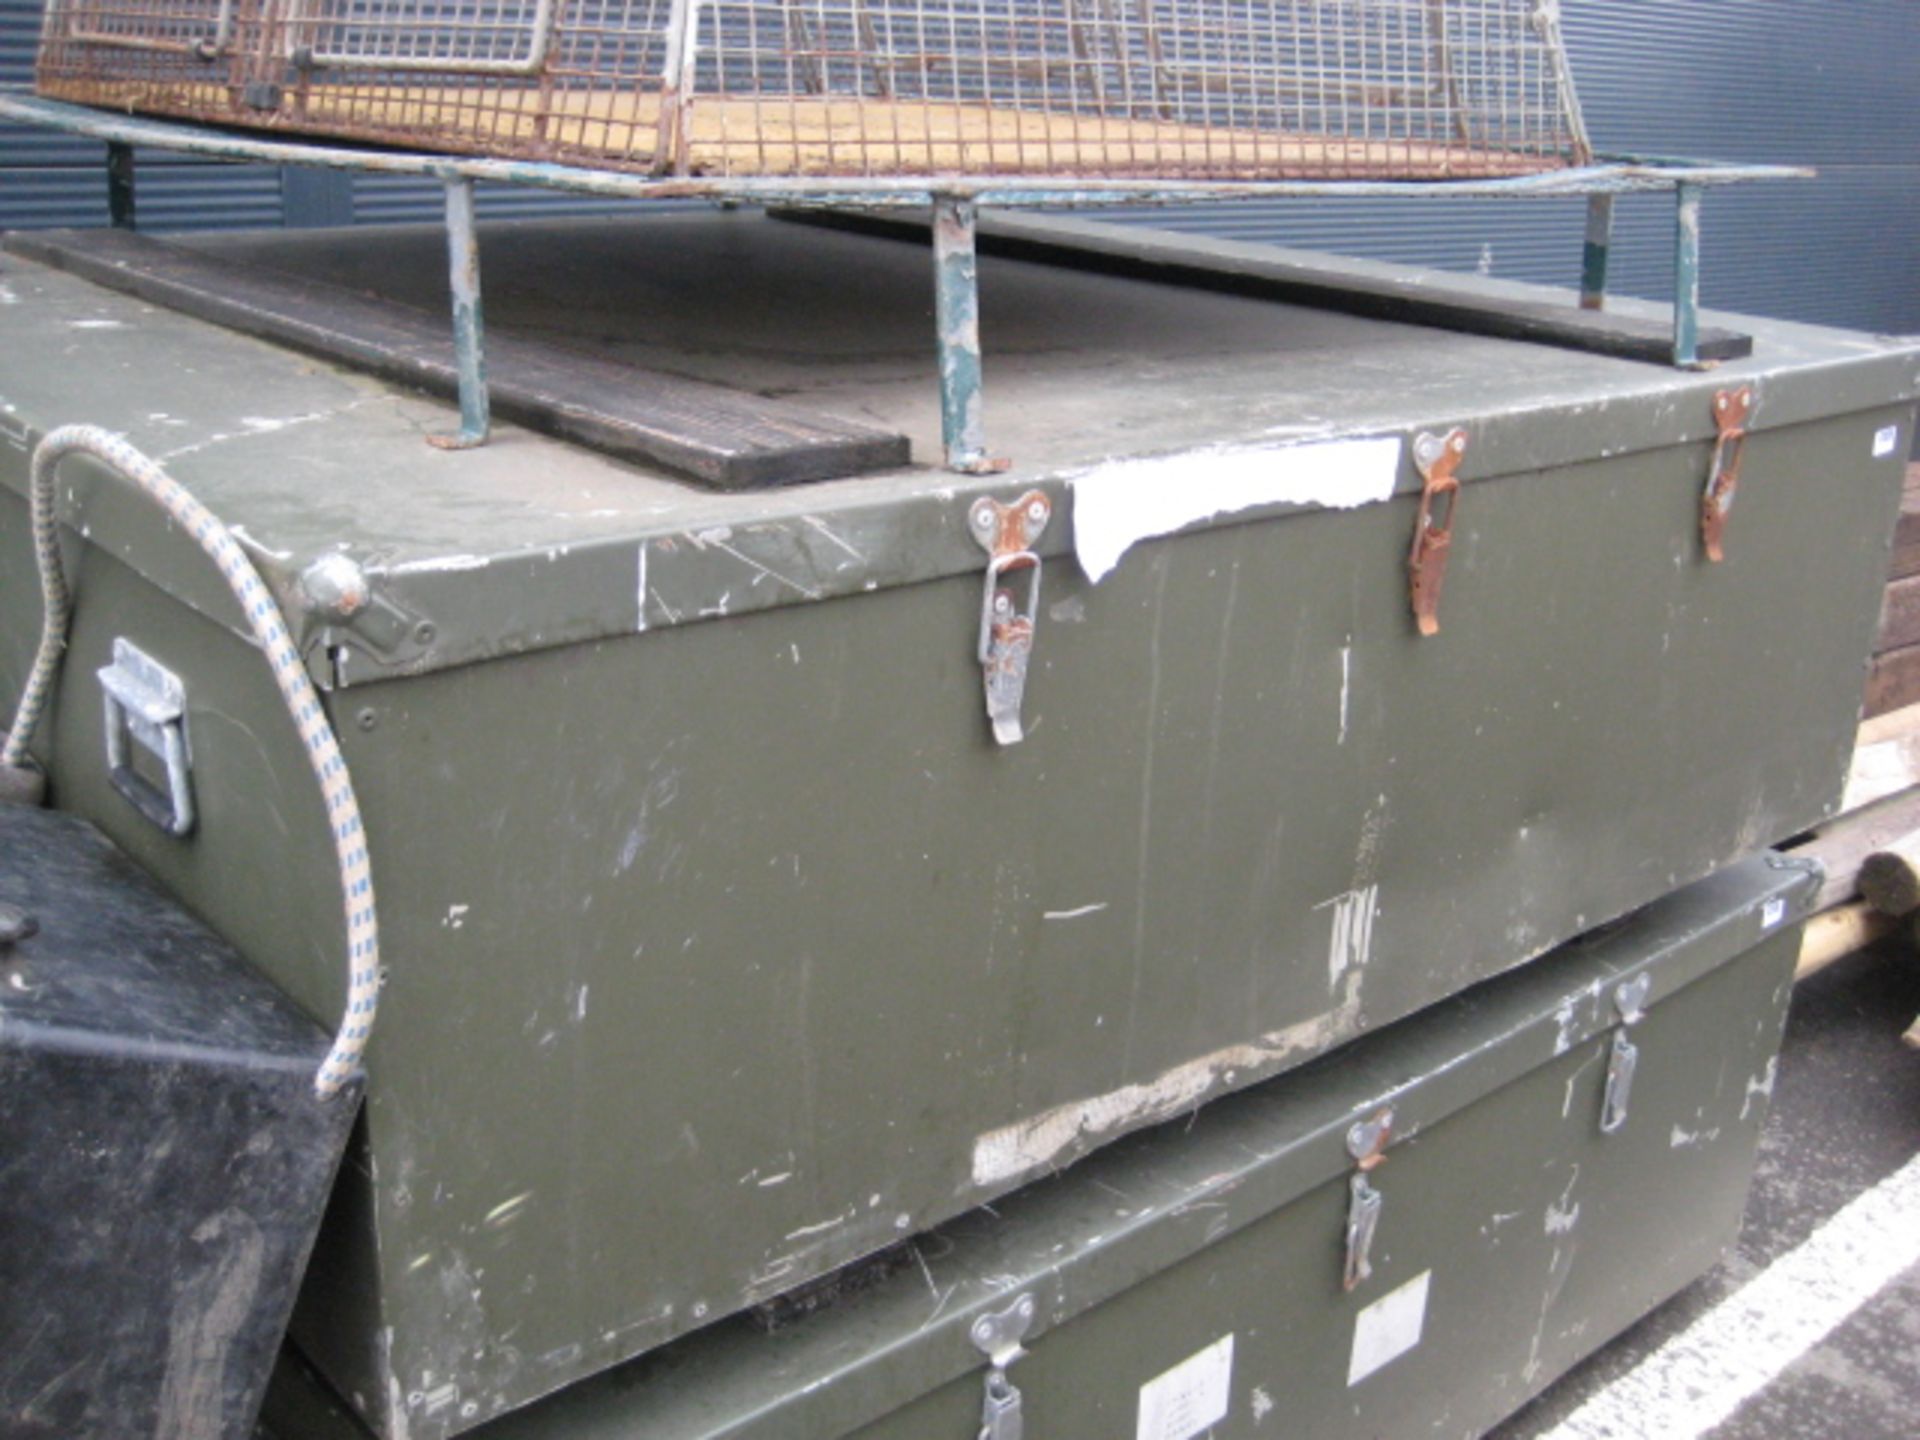 Large military cargo transport container (approx. 5' x 5' x 18'')